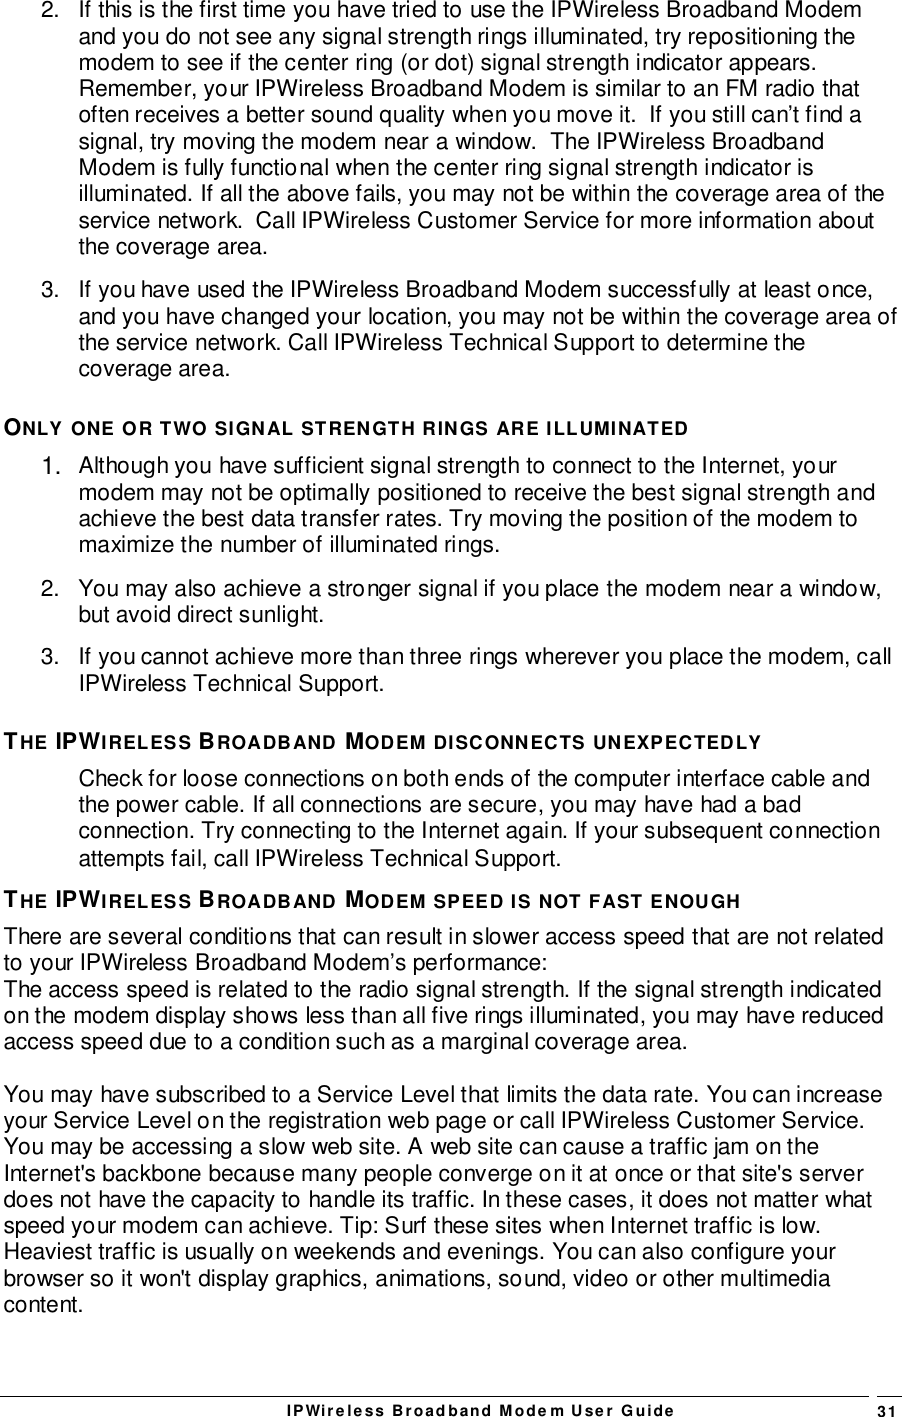 IPWireless Broadband Modem User Guide 312.  If this is the first time you have tried to use the IPWireless Broadband Modemand you do not see any signal strength rings illuminated, try repositioning themodem to see if the center ring (or dot) signal strength indicator appears.Remember, your IPWireless Broadband Modem is similar to an FM radio thatoften receives a better sound quality when you move it.  If you still can’t find asignal, try moving the modem near a window.  The IPWireless BroadbandModem is fully functional when the center ring signal strength indicator isilluminated. If all the above fails, you may not be within the coverage area of theservice network.  Call IPWireless Customer Service for more information aboutthe coverage area.3.  If you have used the IPWireless Broadband Modem successfully at least once,and you have changed your location, you may not be within the coverage area ofthe service network. Call IPWireless Technical Support to determine thecoverage area.ONLY ONE OR TWO SIGNAL STRENGTH RINGS ARE ILLUMINATED1.  Although you have sufficient signal strength to connect to the Internet, yourmodem may not be optimally positioned to receive the best signal strength andachieve the best data transfer rates. Try moving the position of the modem tomaximize the number of illuminated rings.2.  You may also achieve a stronger signal if you place the modem near a window,but avoid direct sunlight.3.  If you cannot achieve more than three rings wherever you place the modem, callIPWireless Technical Support.THE IPWIRELESS BROADBAND MODEM DISCONNECTS UNEXPECTEDLYCheck for loose connections on both ends of the computer interface cable andthe power cable. If all connections are secure, you may have had a badconnection. Try connecting to the Internet again. If your subsequent connectionattempts fail, call IPWireless Technical Support.THE IPWIRELESS BROADBAND MODEM SPEED IS NOT FAST ENOUGHThere are several conditions that can result in slower access speed that are not relatedto your IPWireless Broadband Modem’s performance:The access speed is related to the radio signal strength. If the signal strength indicatedon the modem display shows less than all five rings illuminated, you may have reducedaccess speed due to a condition such as a marginal coverage area.You may have subscribed to a Service Level that limits the data rate. You can increaseyour Service Level on the registration web page or call IPWireless Customer Service.You may be accessing a slow web site. A web site can cause a traffic jam on theInternet&apos;s backbone because many people converge on it at once or that site&apos;s serverdoes not have the capacity to handle its traffic. In these cases, it does not matter whatspeed your modem can achieve. Tip: Surf these sites when Internet traffic is low.Heaviest traffic is usually on weekends and evenings. You can also configure yourbrowser so it won&apos;t display graphics, animations, sound, video or other multimediacontent.